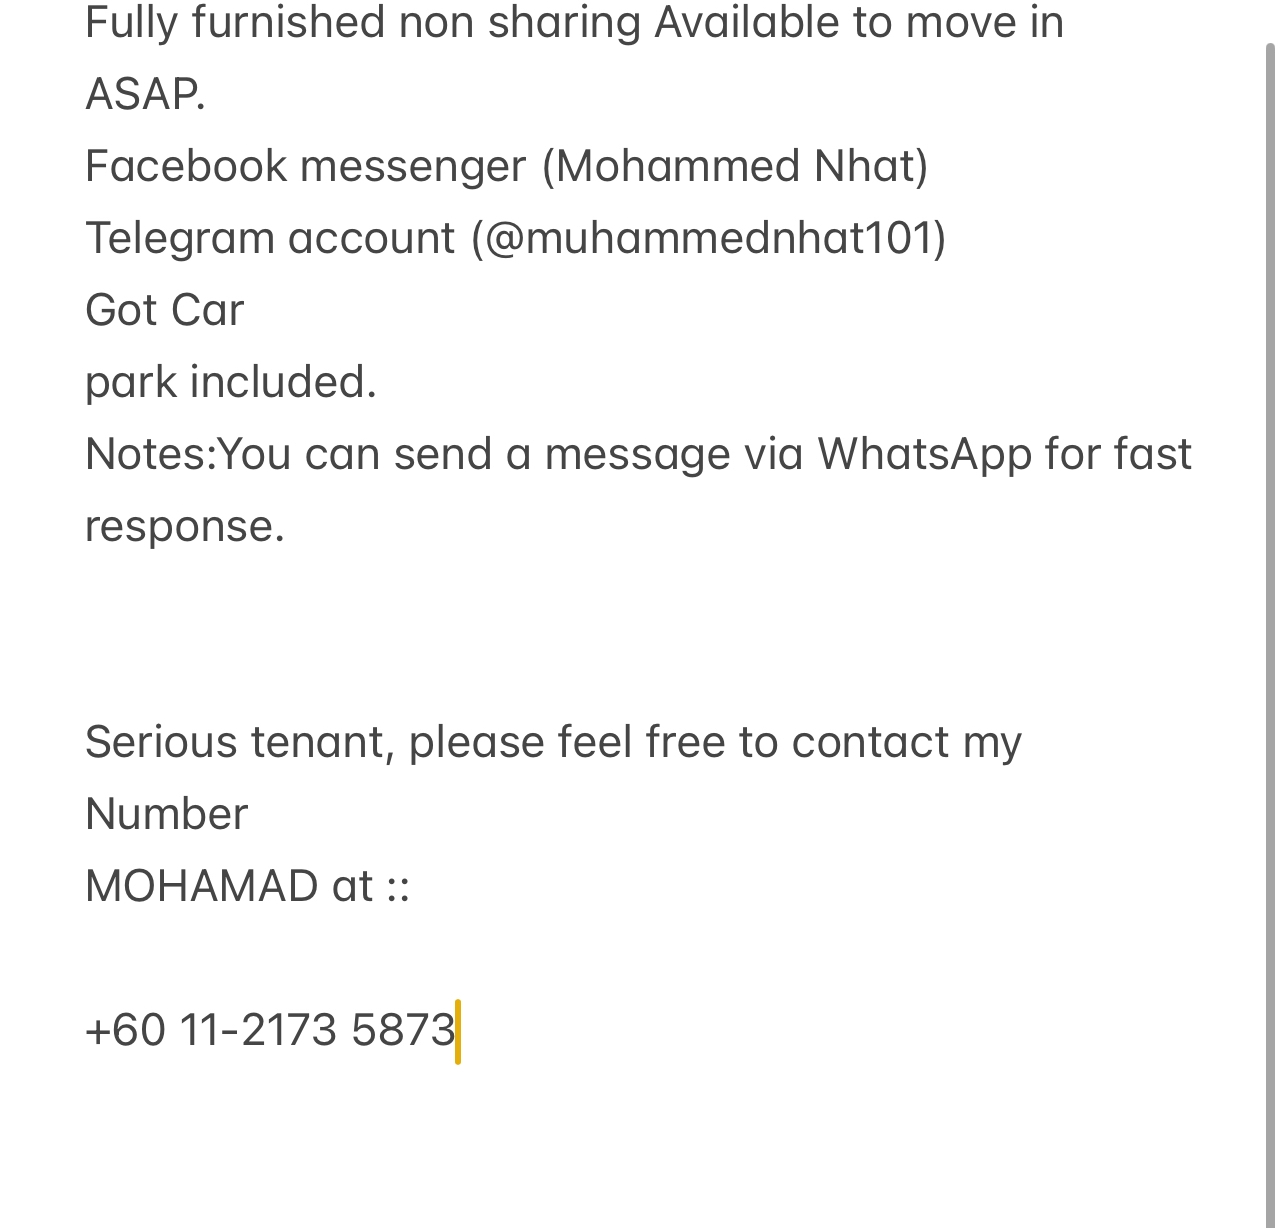 room for rent, studio, teluk intan, Send the owner a message on WhatsApp/facebook if you want to RENT the unit facebook (Mohammed Nhat)&Telegram(@muhammednhat101) Fully furnished non sharing :(comfortable)